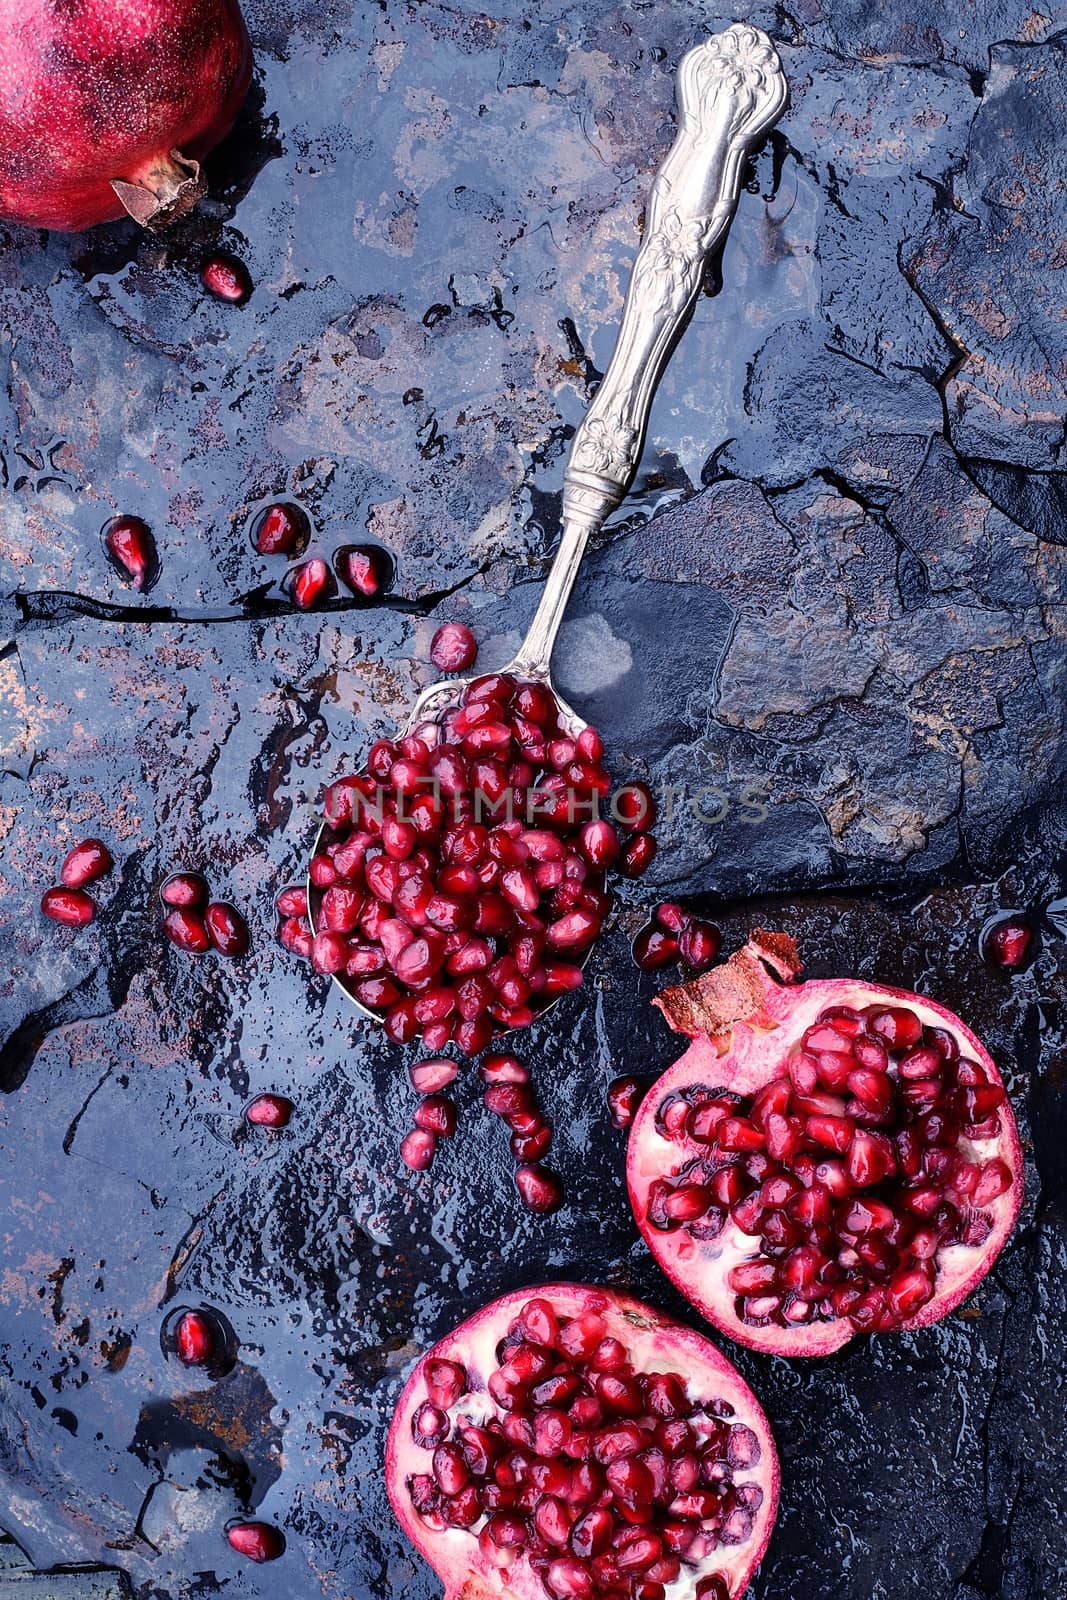 Pomegranate seeds in an antique silver spoon over a rustic background. 